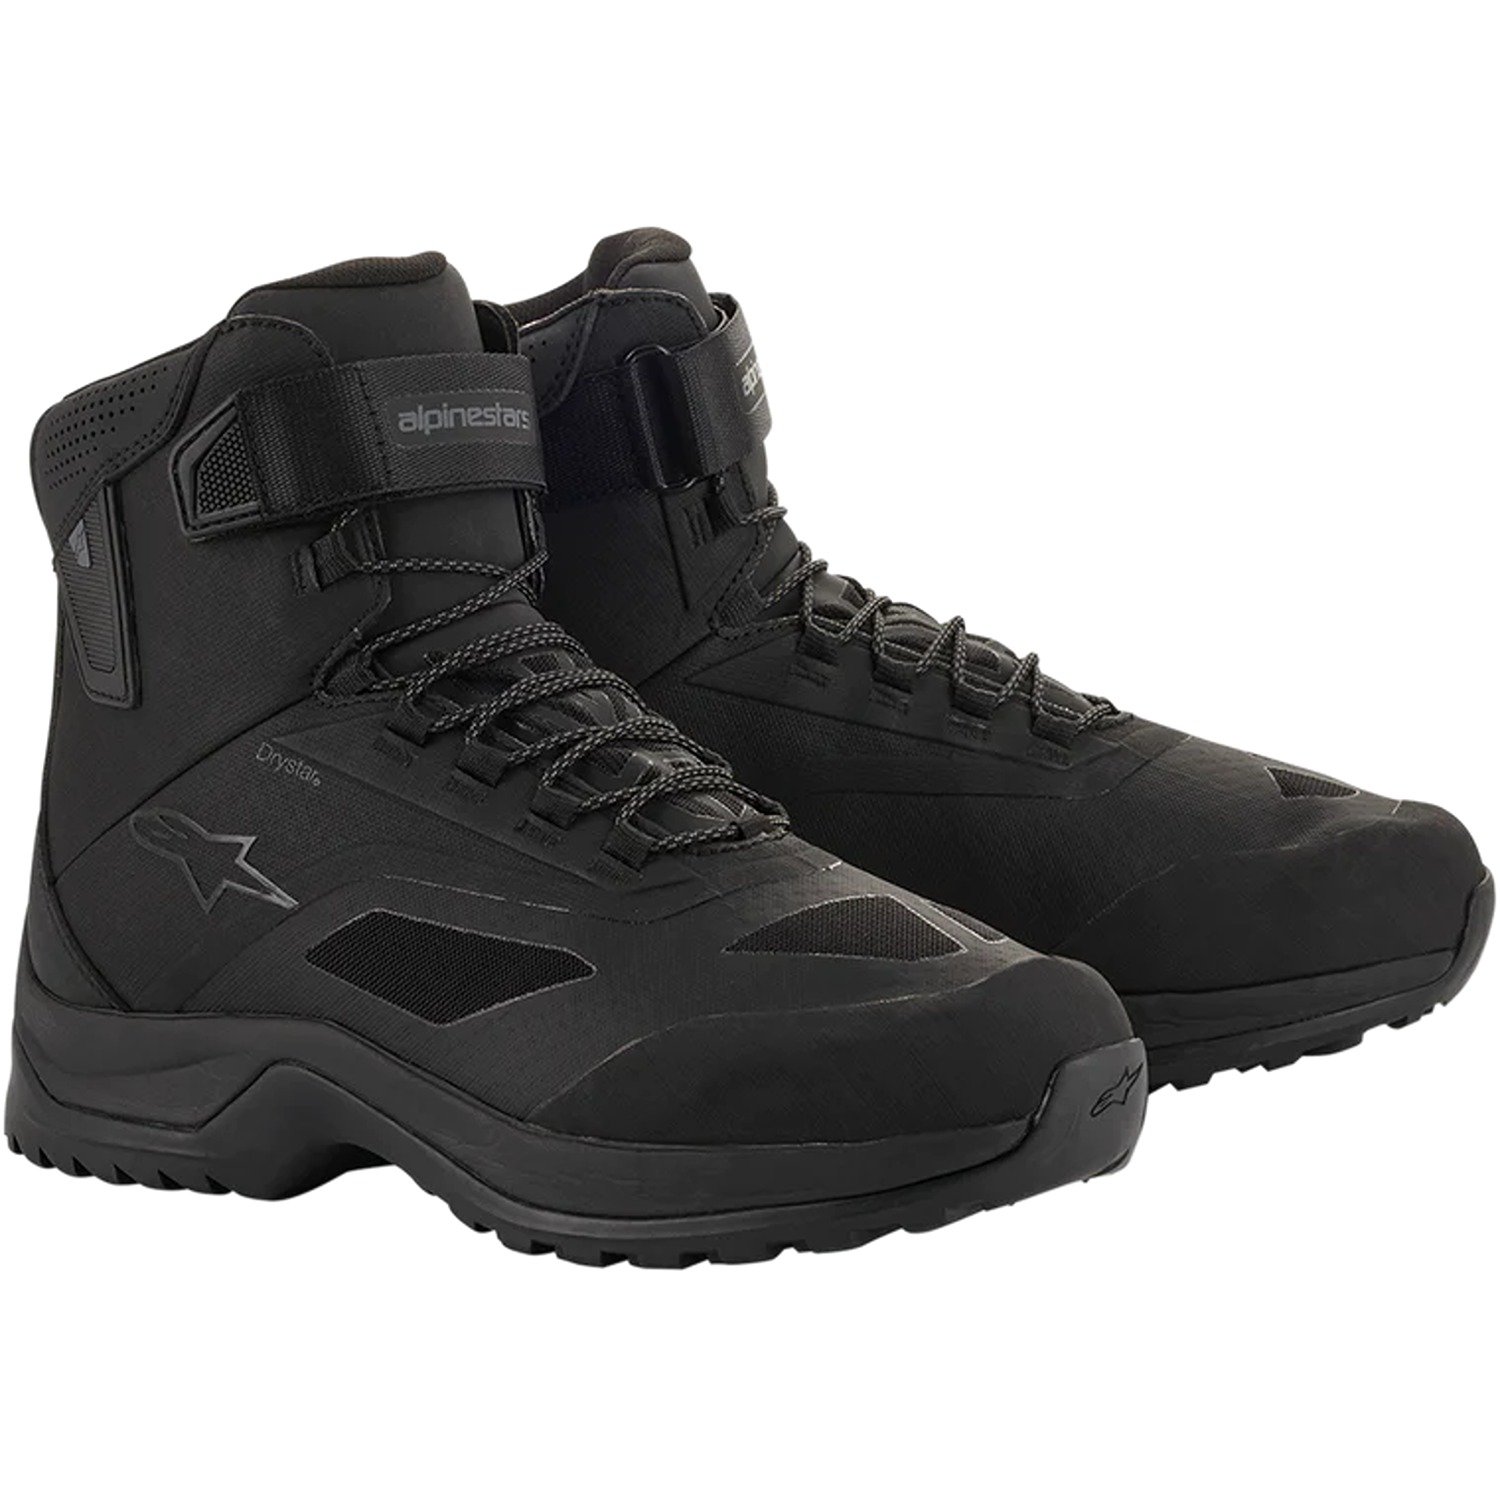 Image of Alpinestars CR-6 Drystar Riding Shoes Black Taille US 10